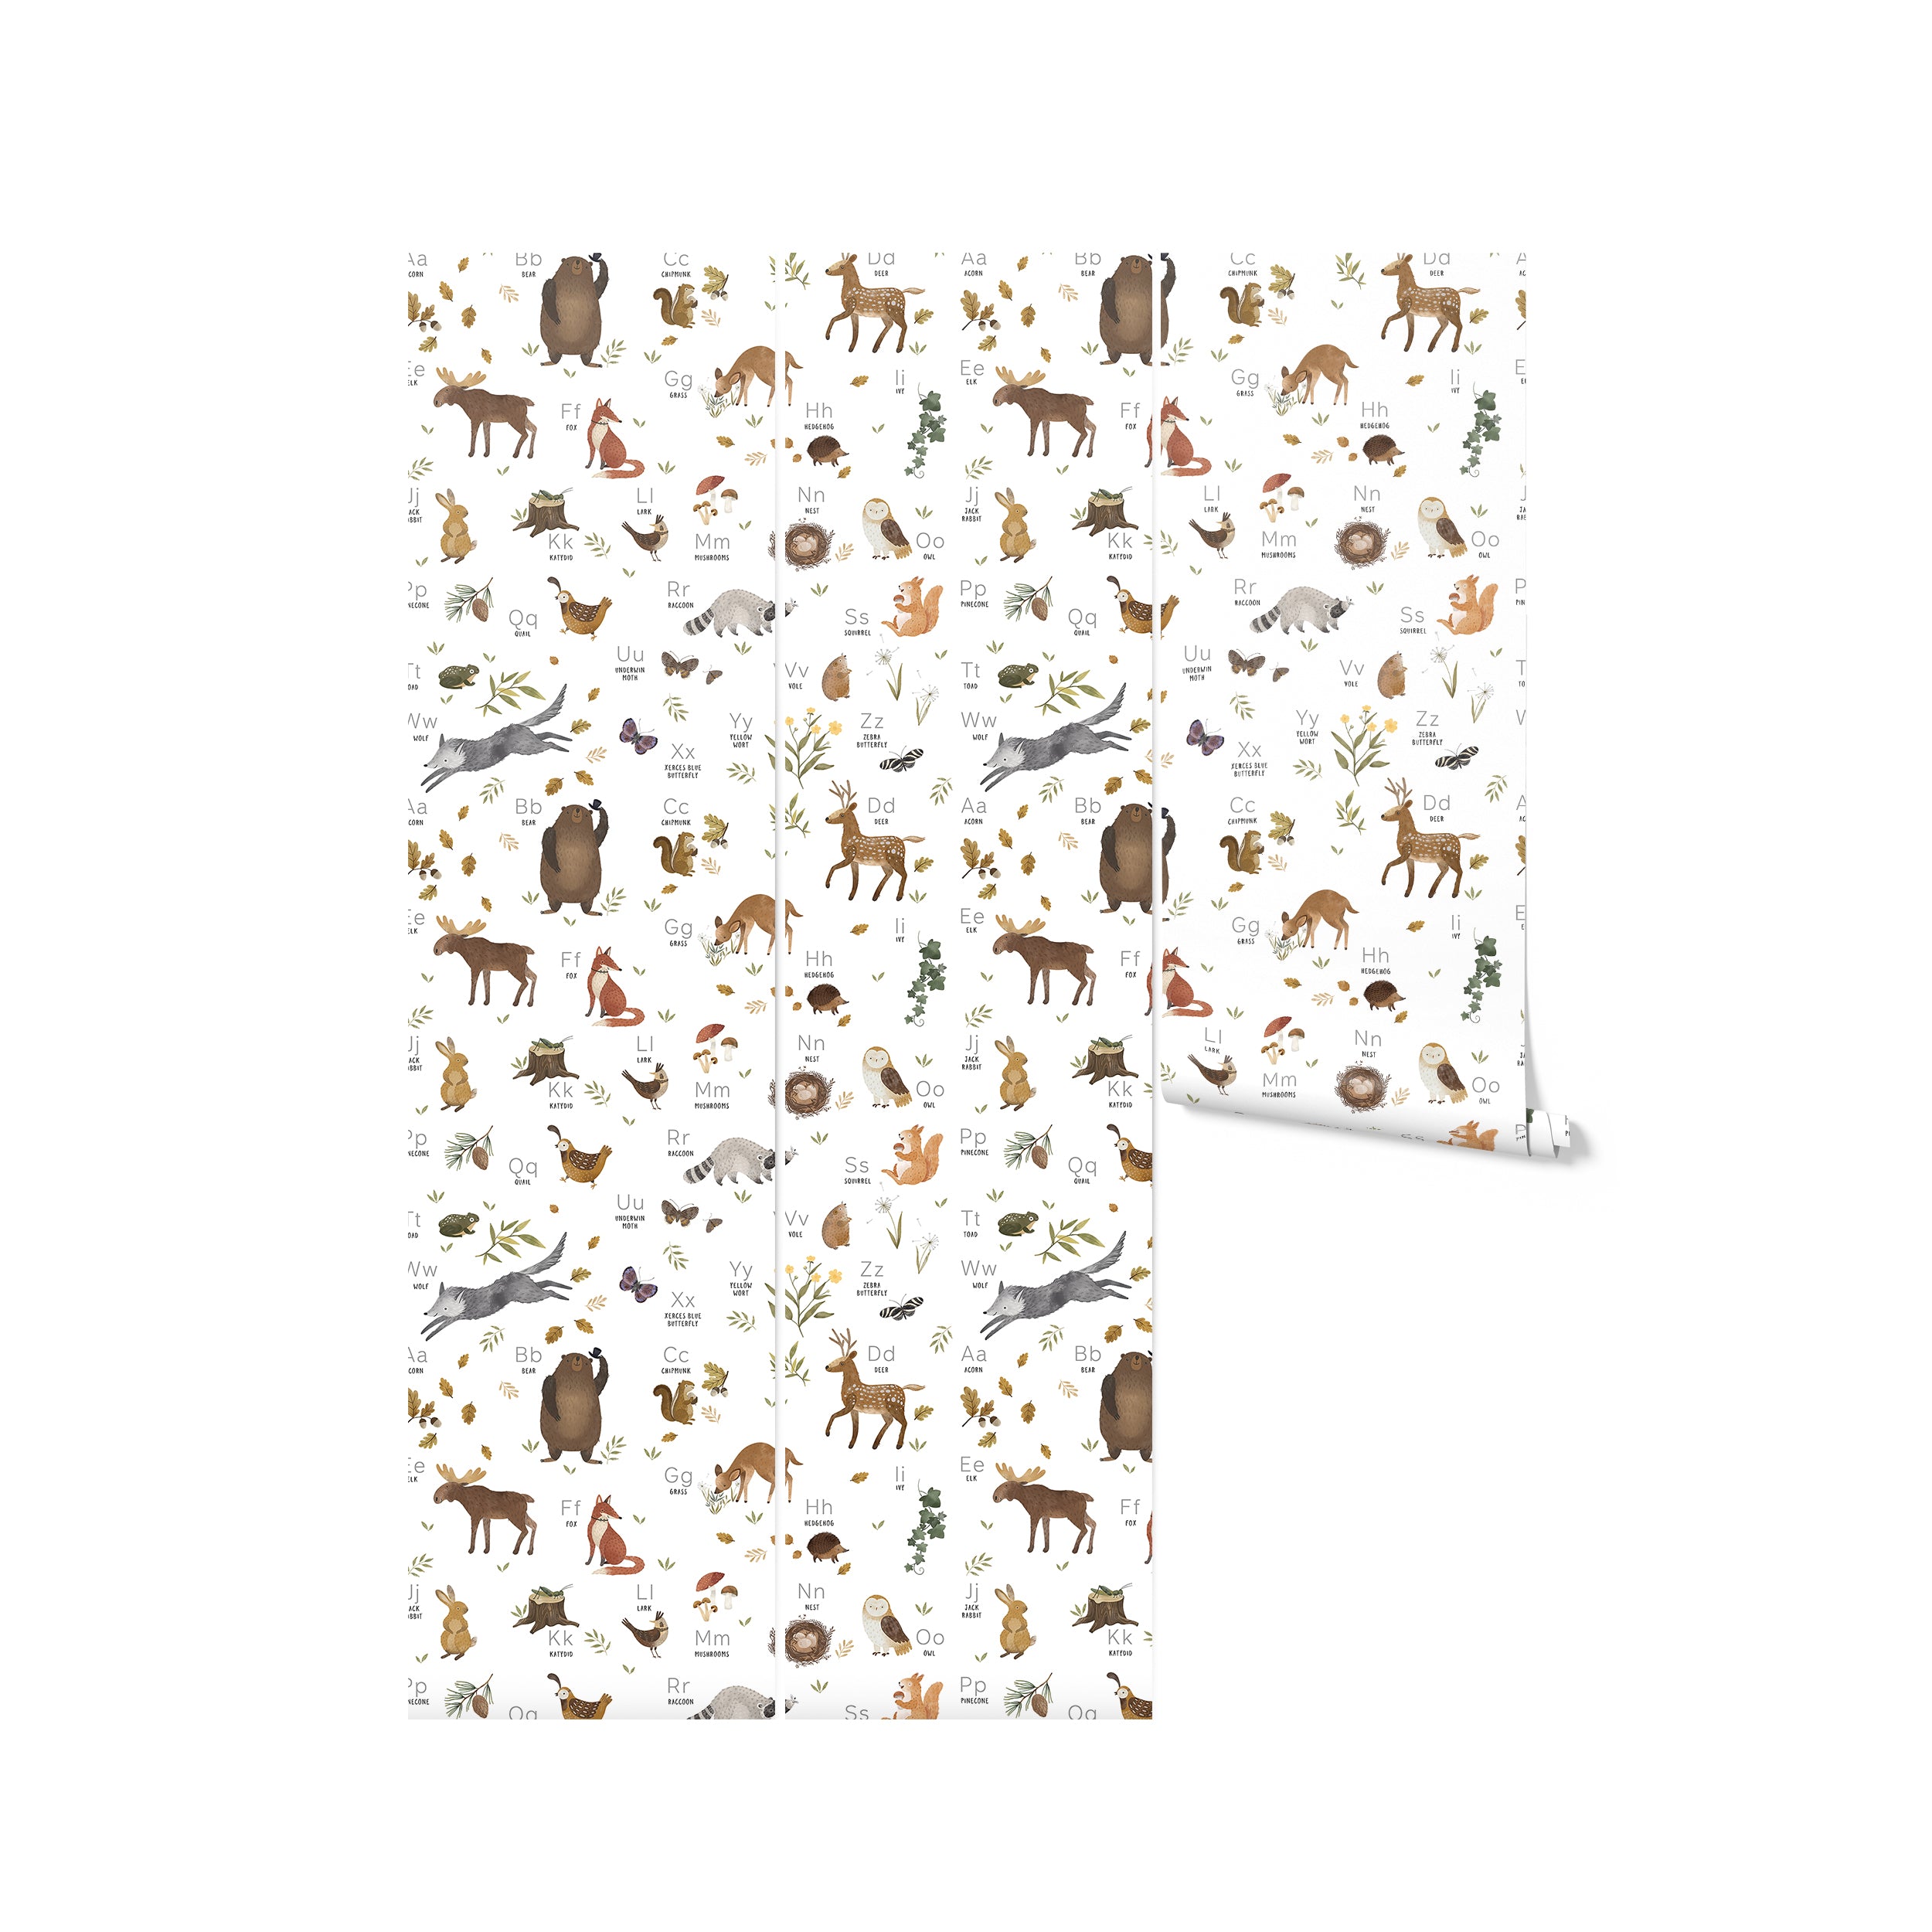 A roll of Forest Alphabet Animal Wallpaper II showing the continuous pattern of alphabet letters paired with corresponding forest animals in soft, earthy tones. This wallpaper is perfect for adding a whimsical yet educational element to children’s rooms or play areas.